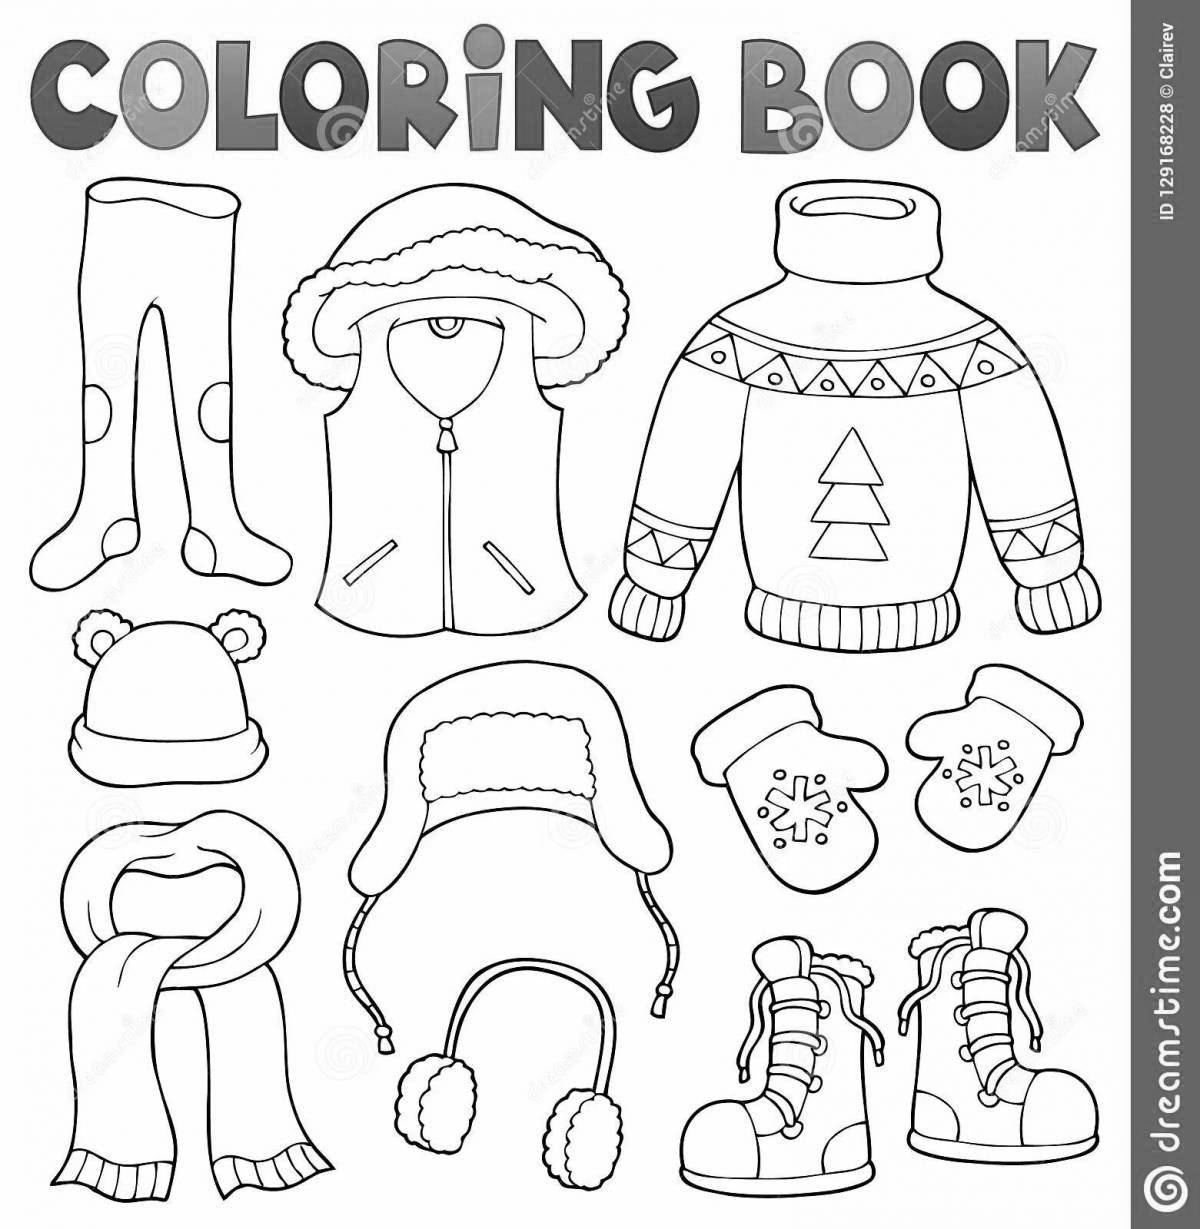 Fabulous winter clothes coloring pages for 6-7 year olds